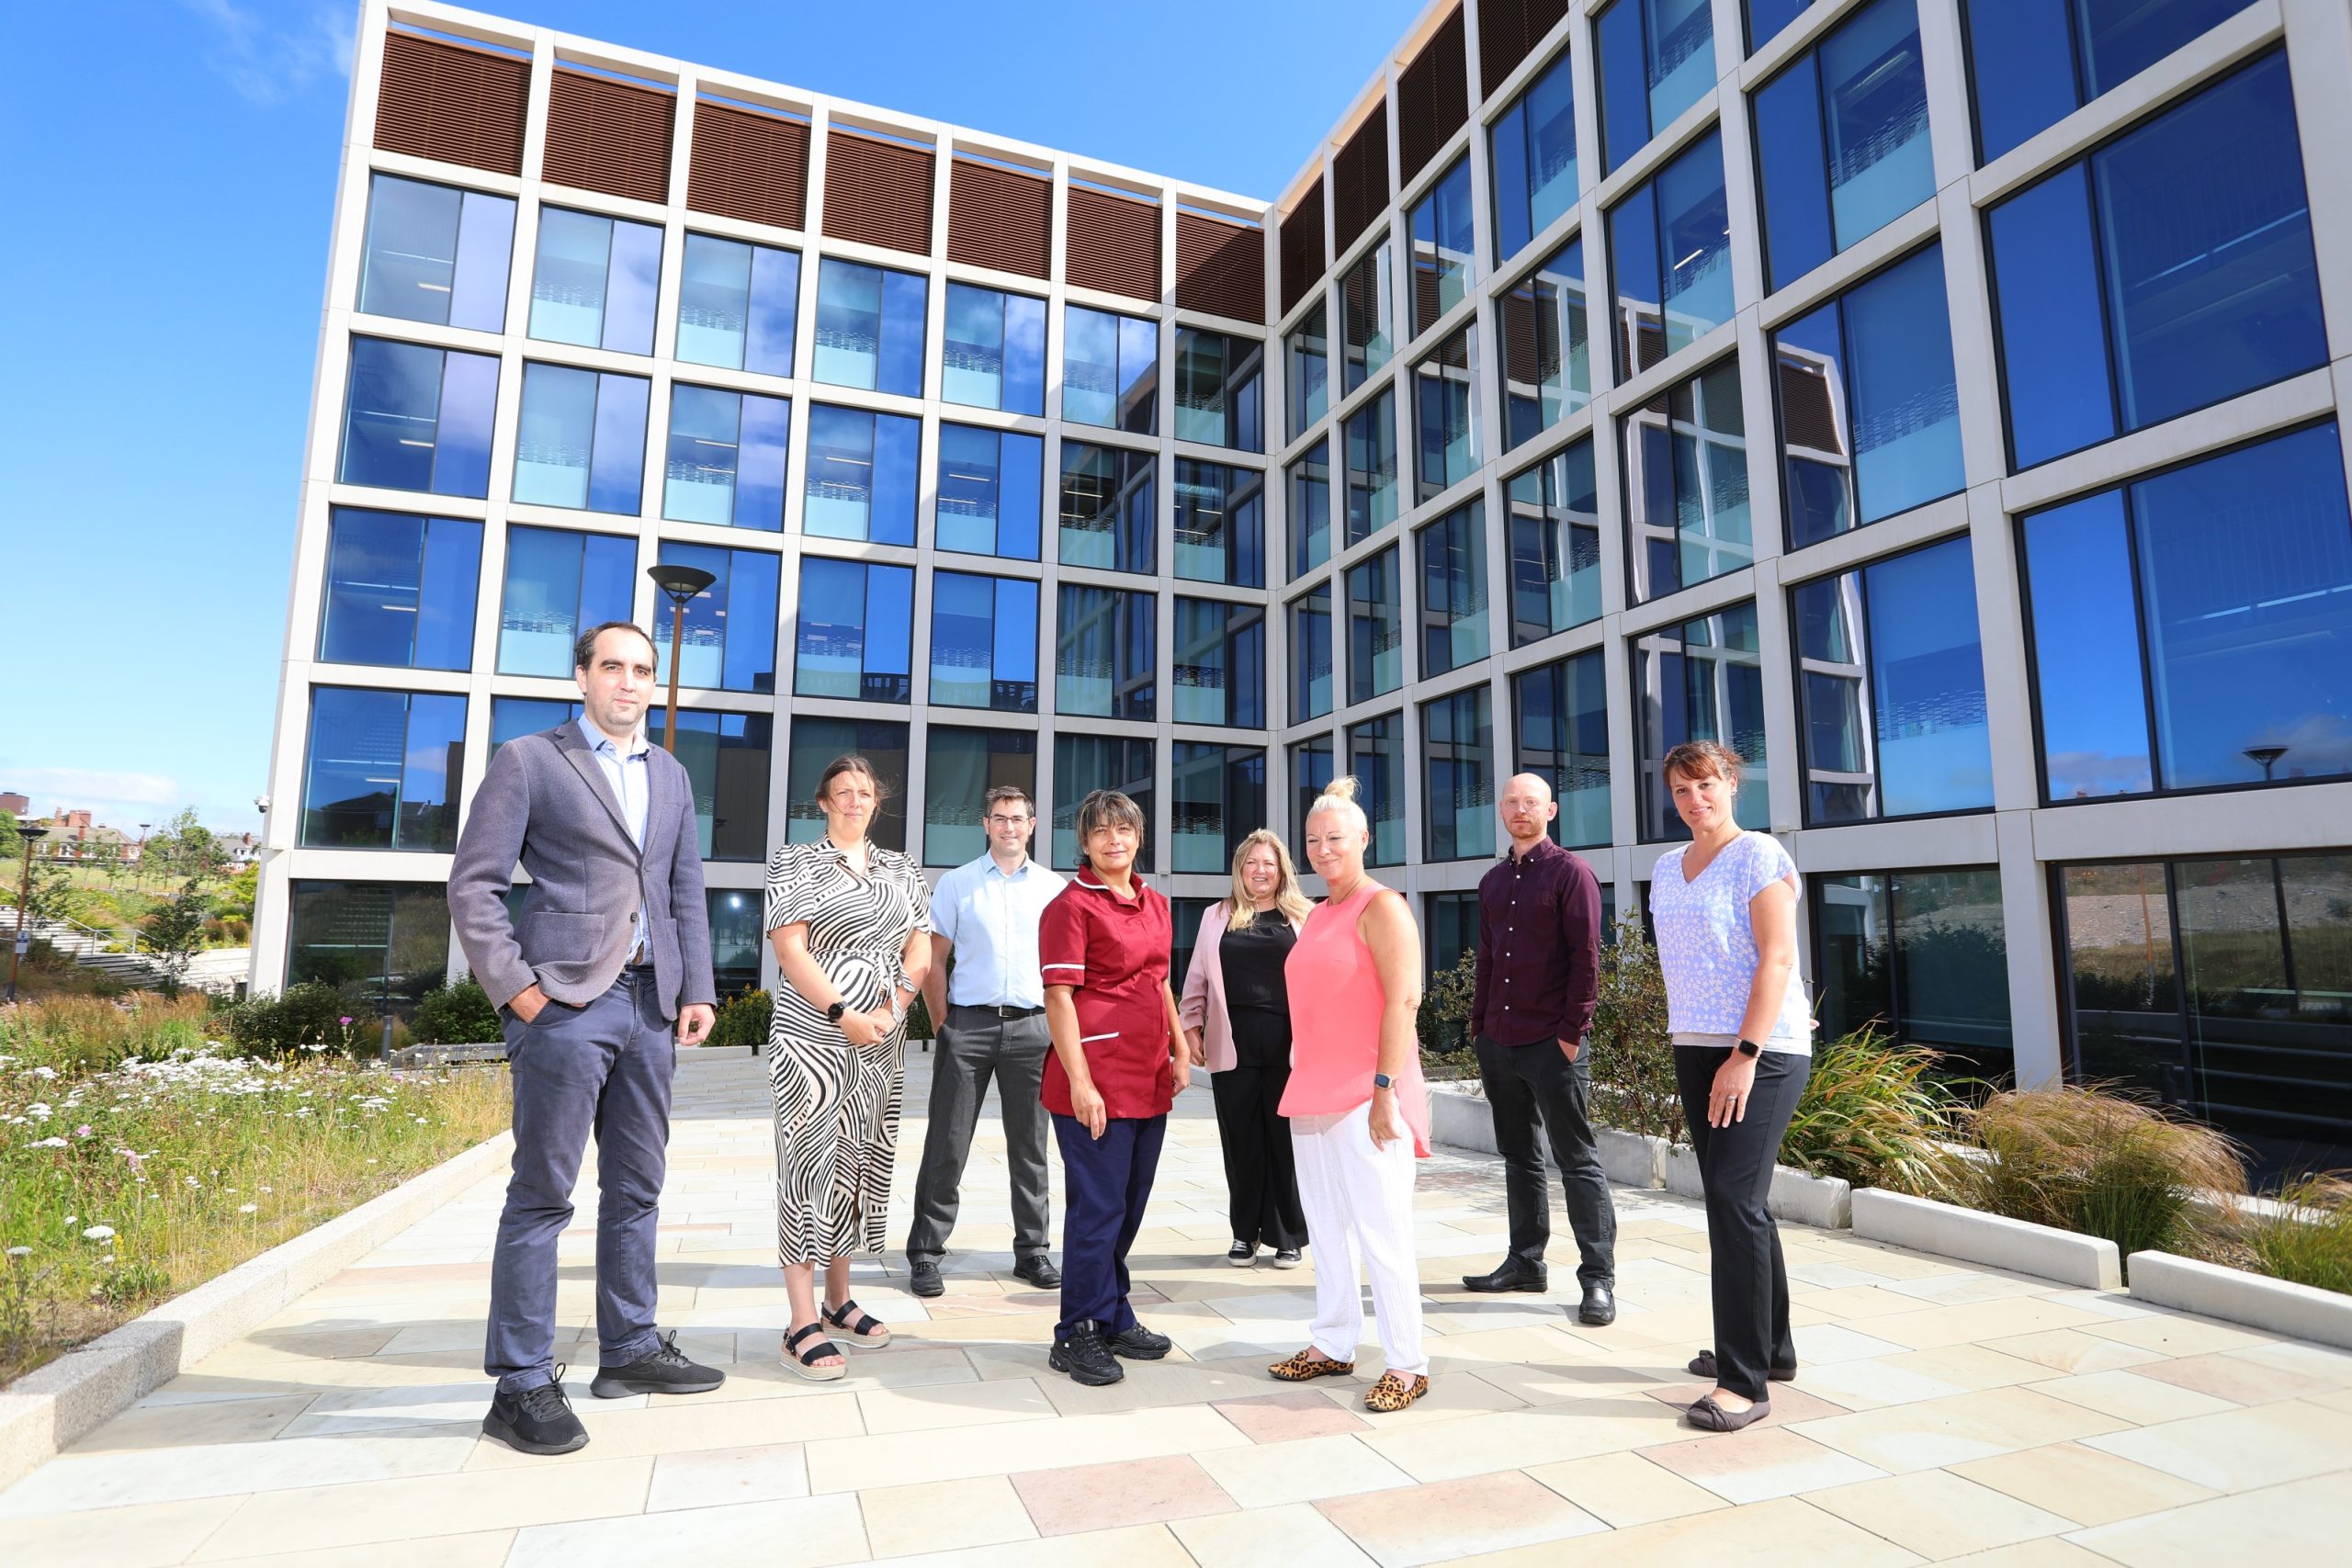 The lab team stood outside The Biosphere building in bright sunshine.